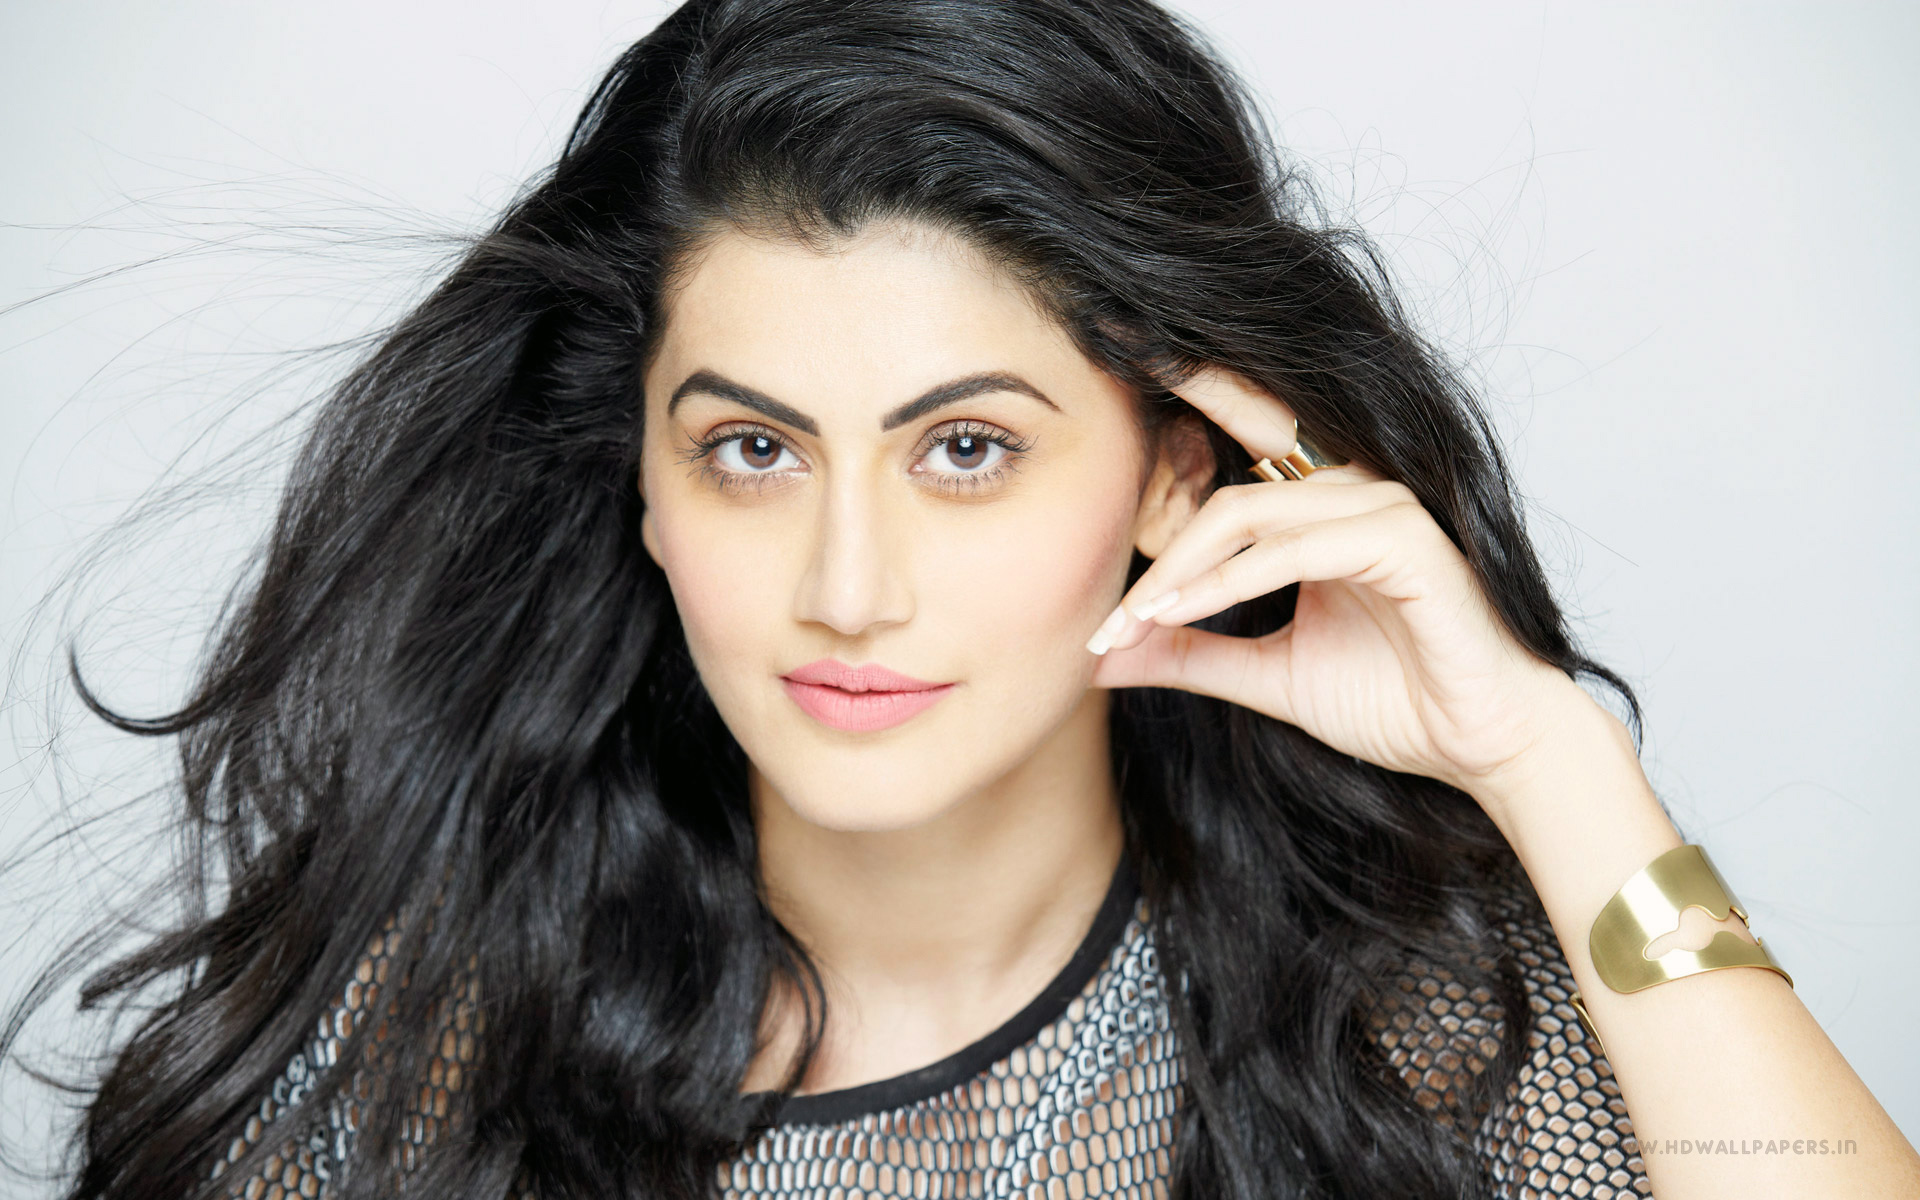 Indian Actresses Image Taapsee Pannu HD Wallpaper And Background